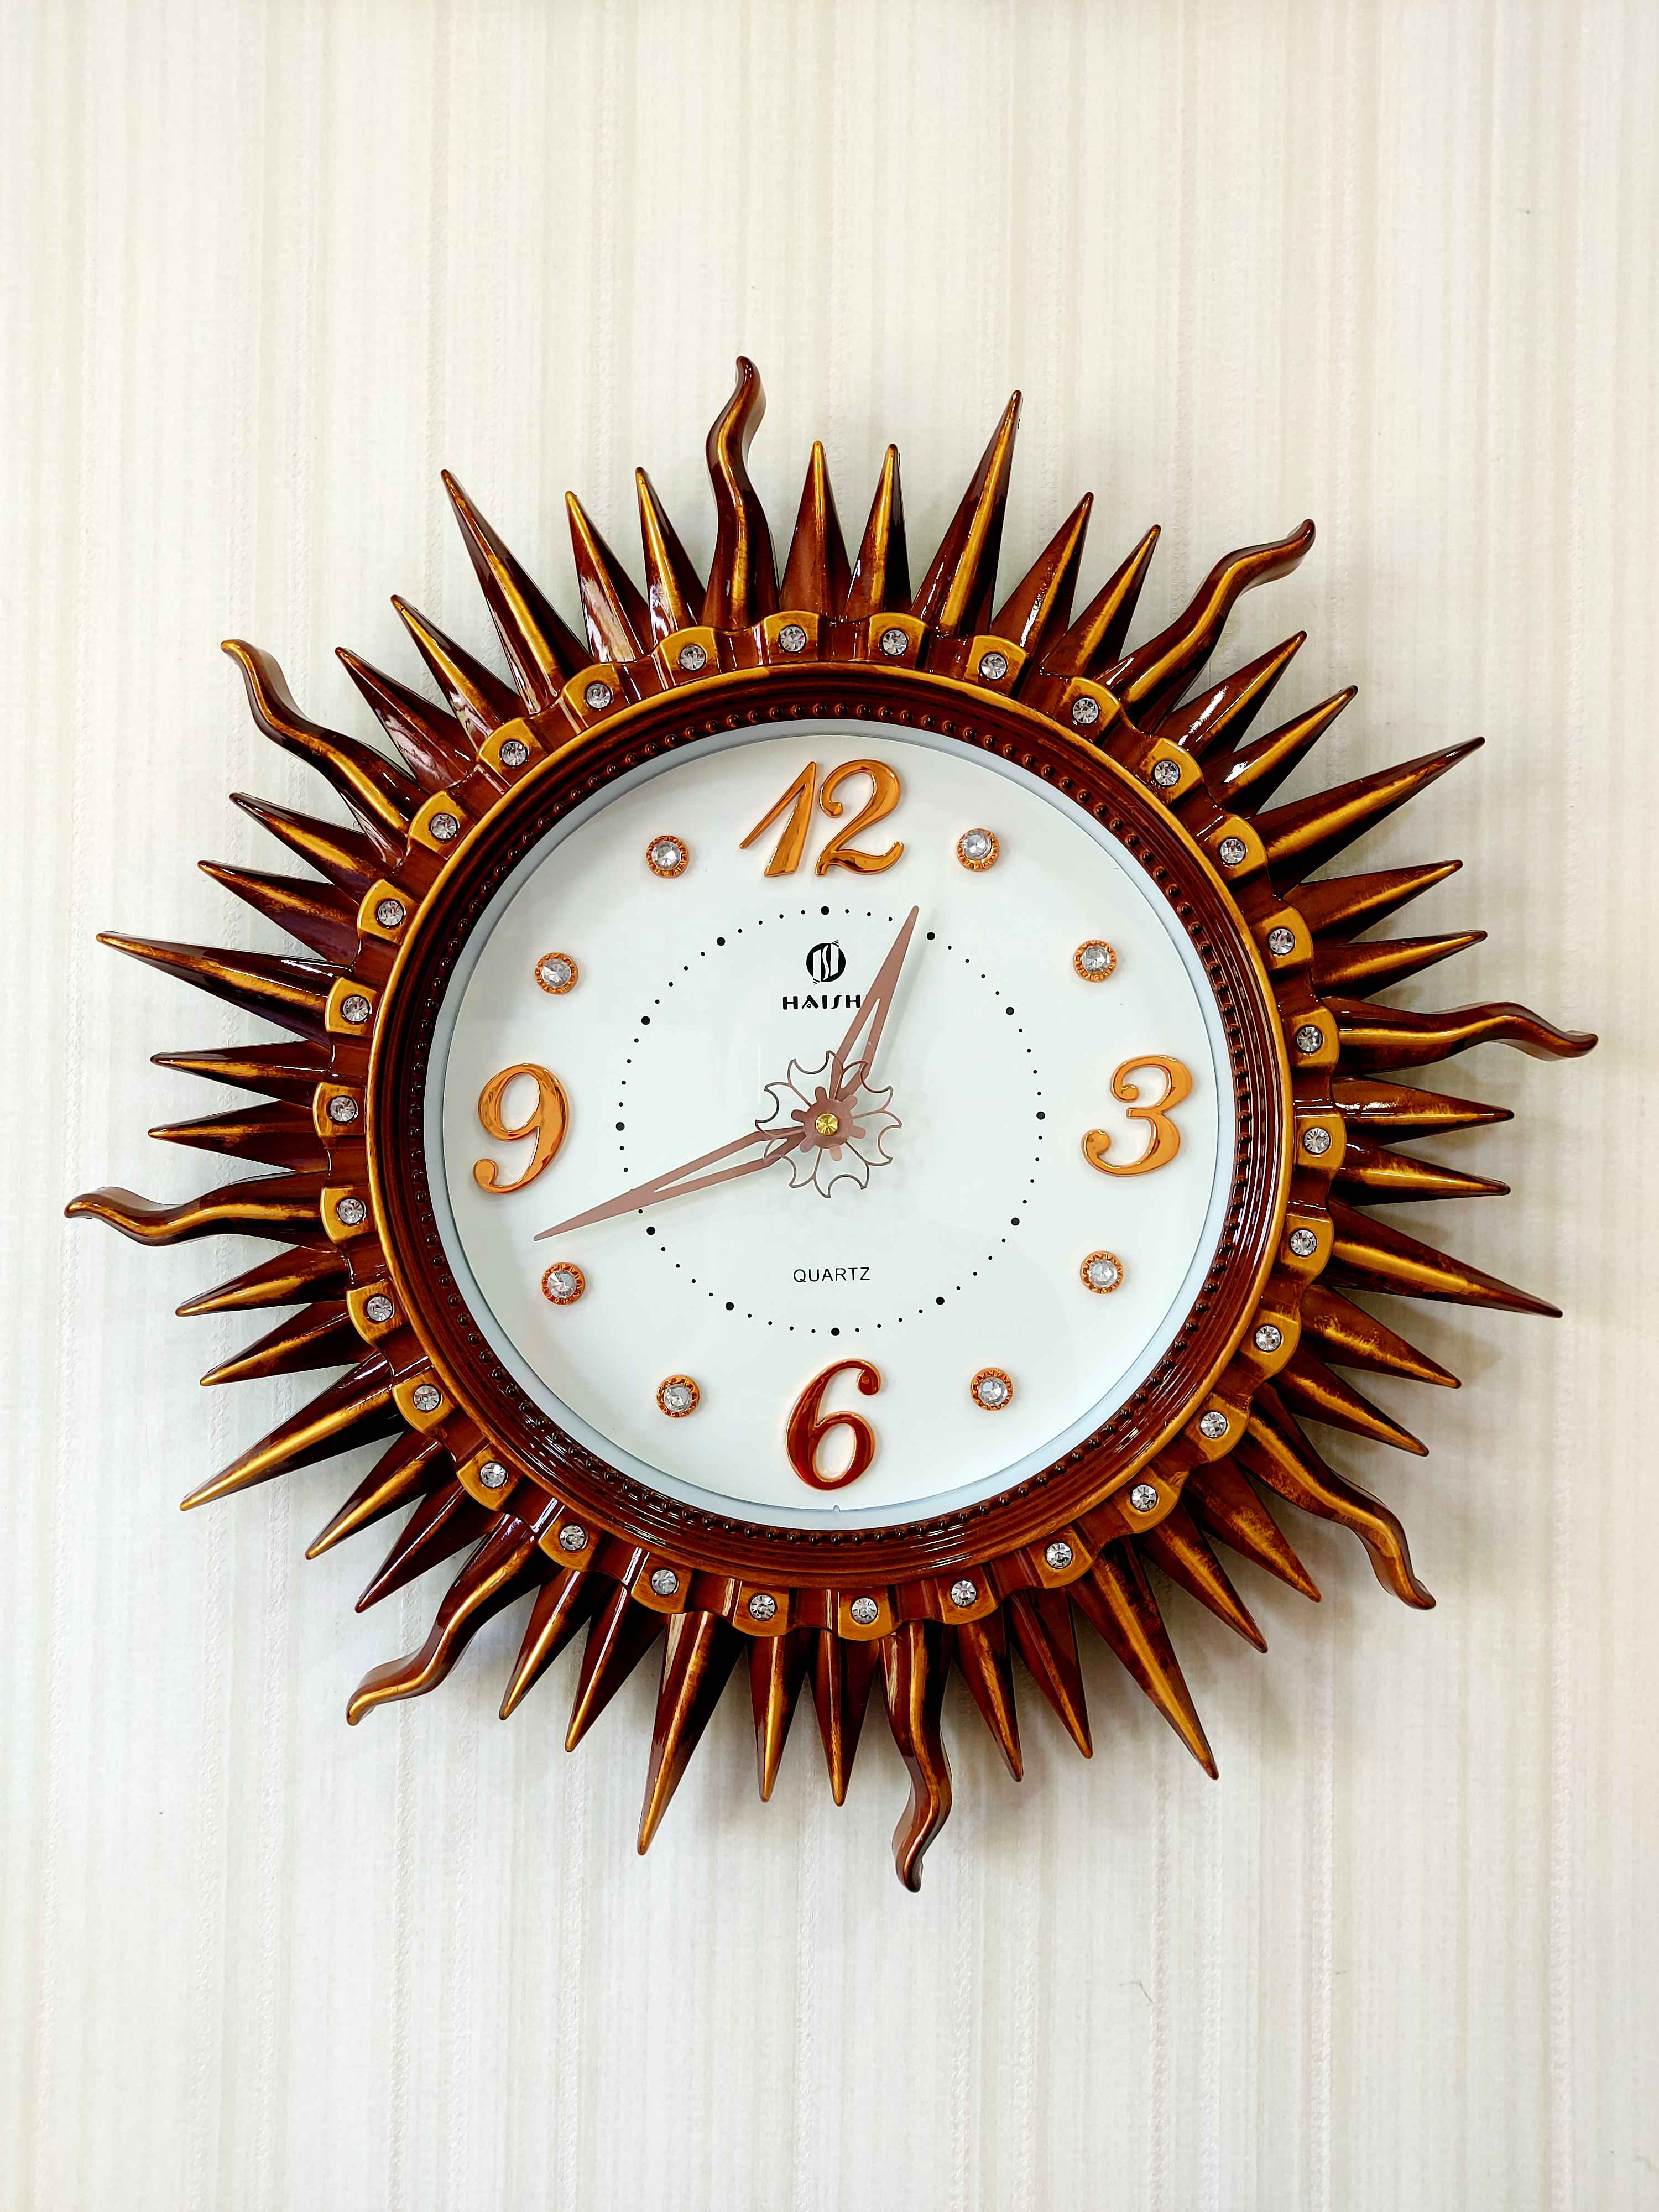 FunkyTradition Gold Brown Sun Shaped Wall Clock, Wall Watch, Wall Decor for Home Office Decor and Gifts 52 CM Tall